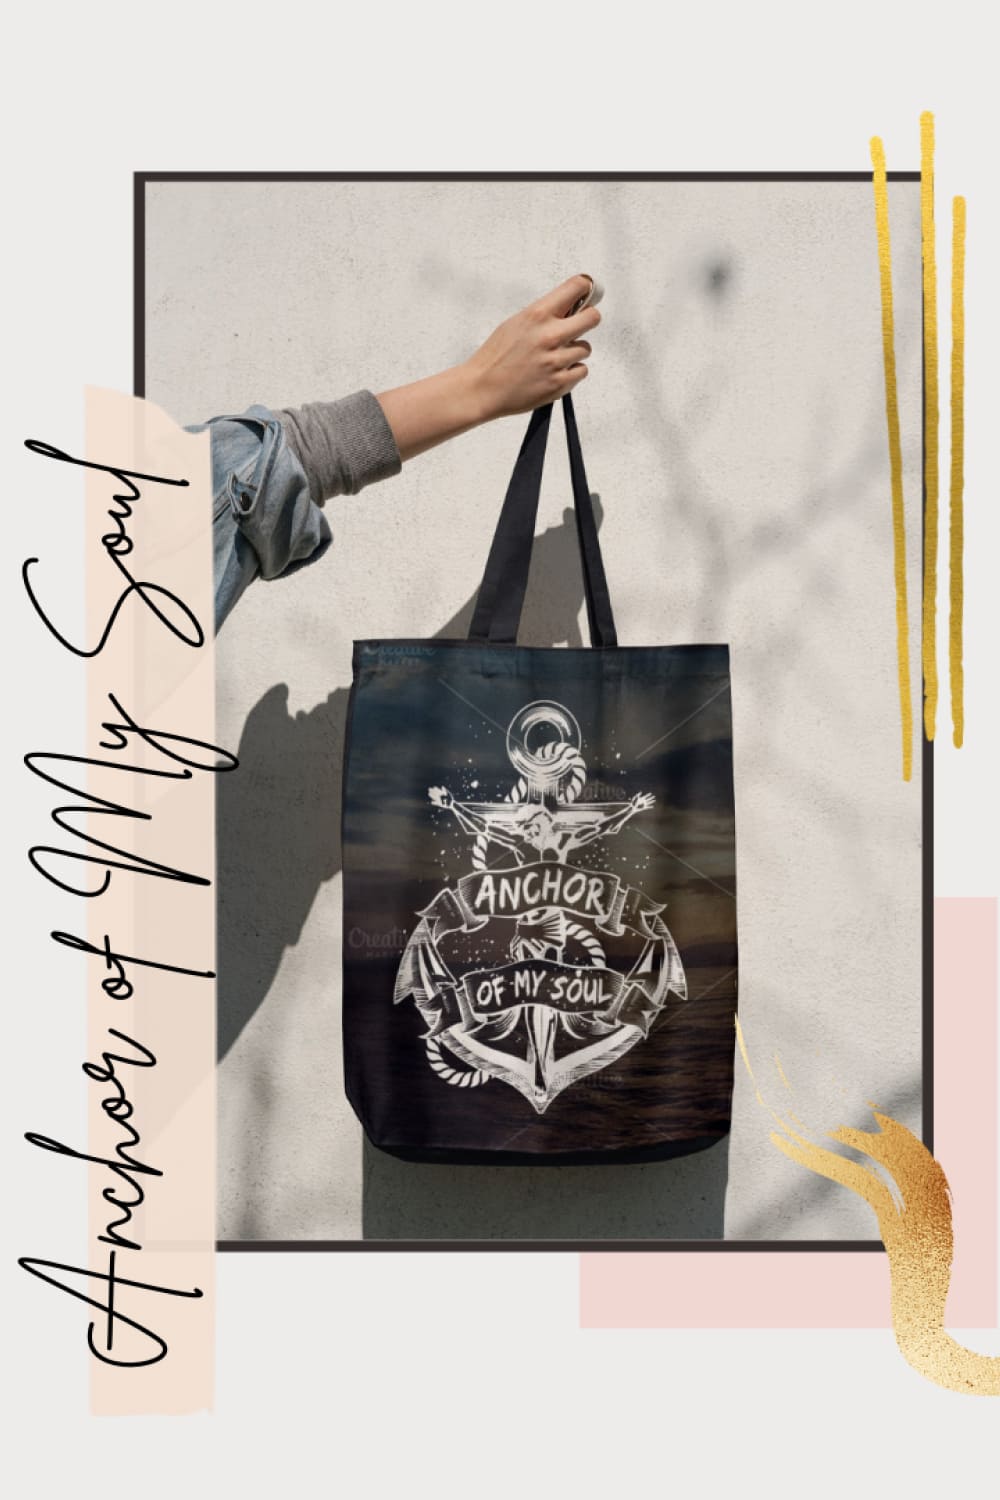 Anchor Of My Soul Typography Design - Pinterest.